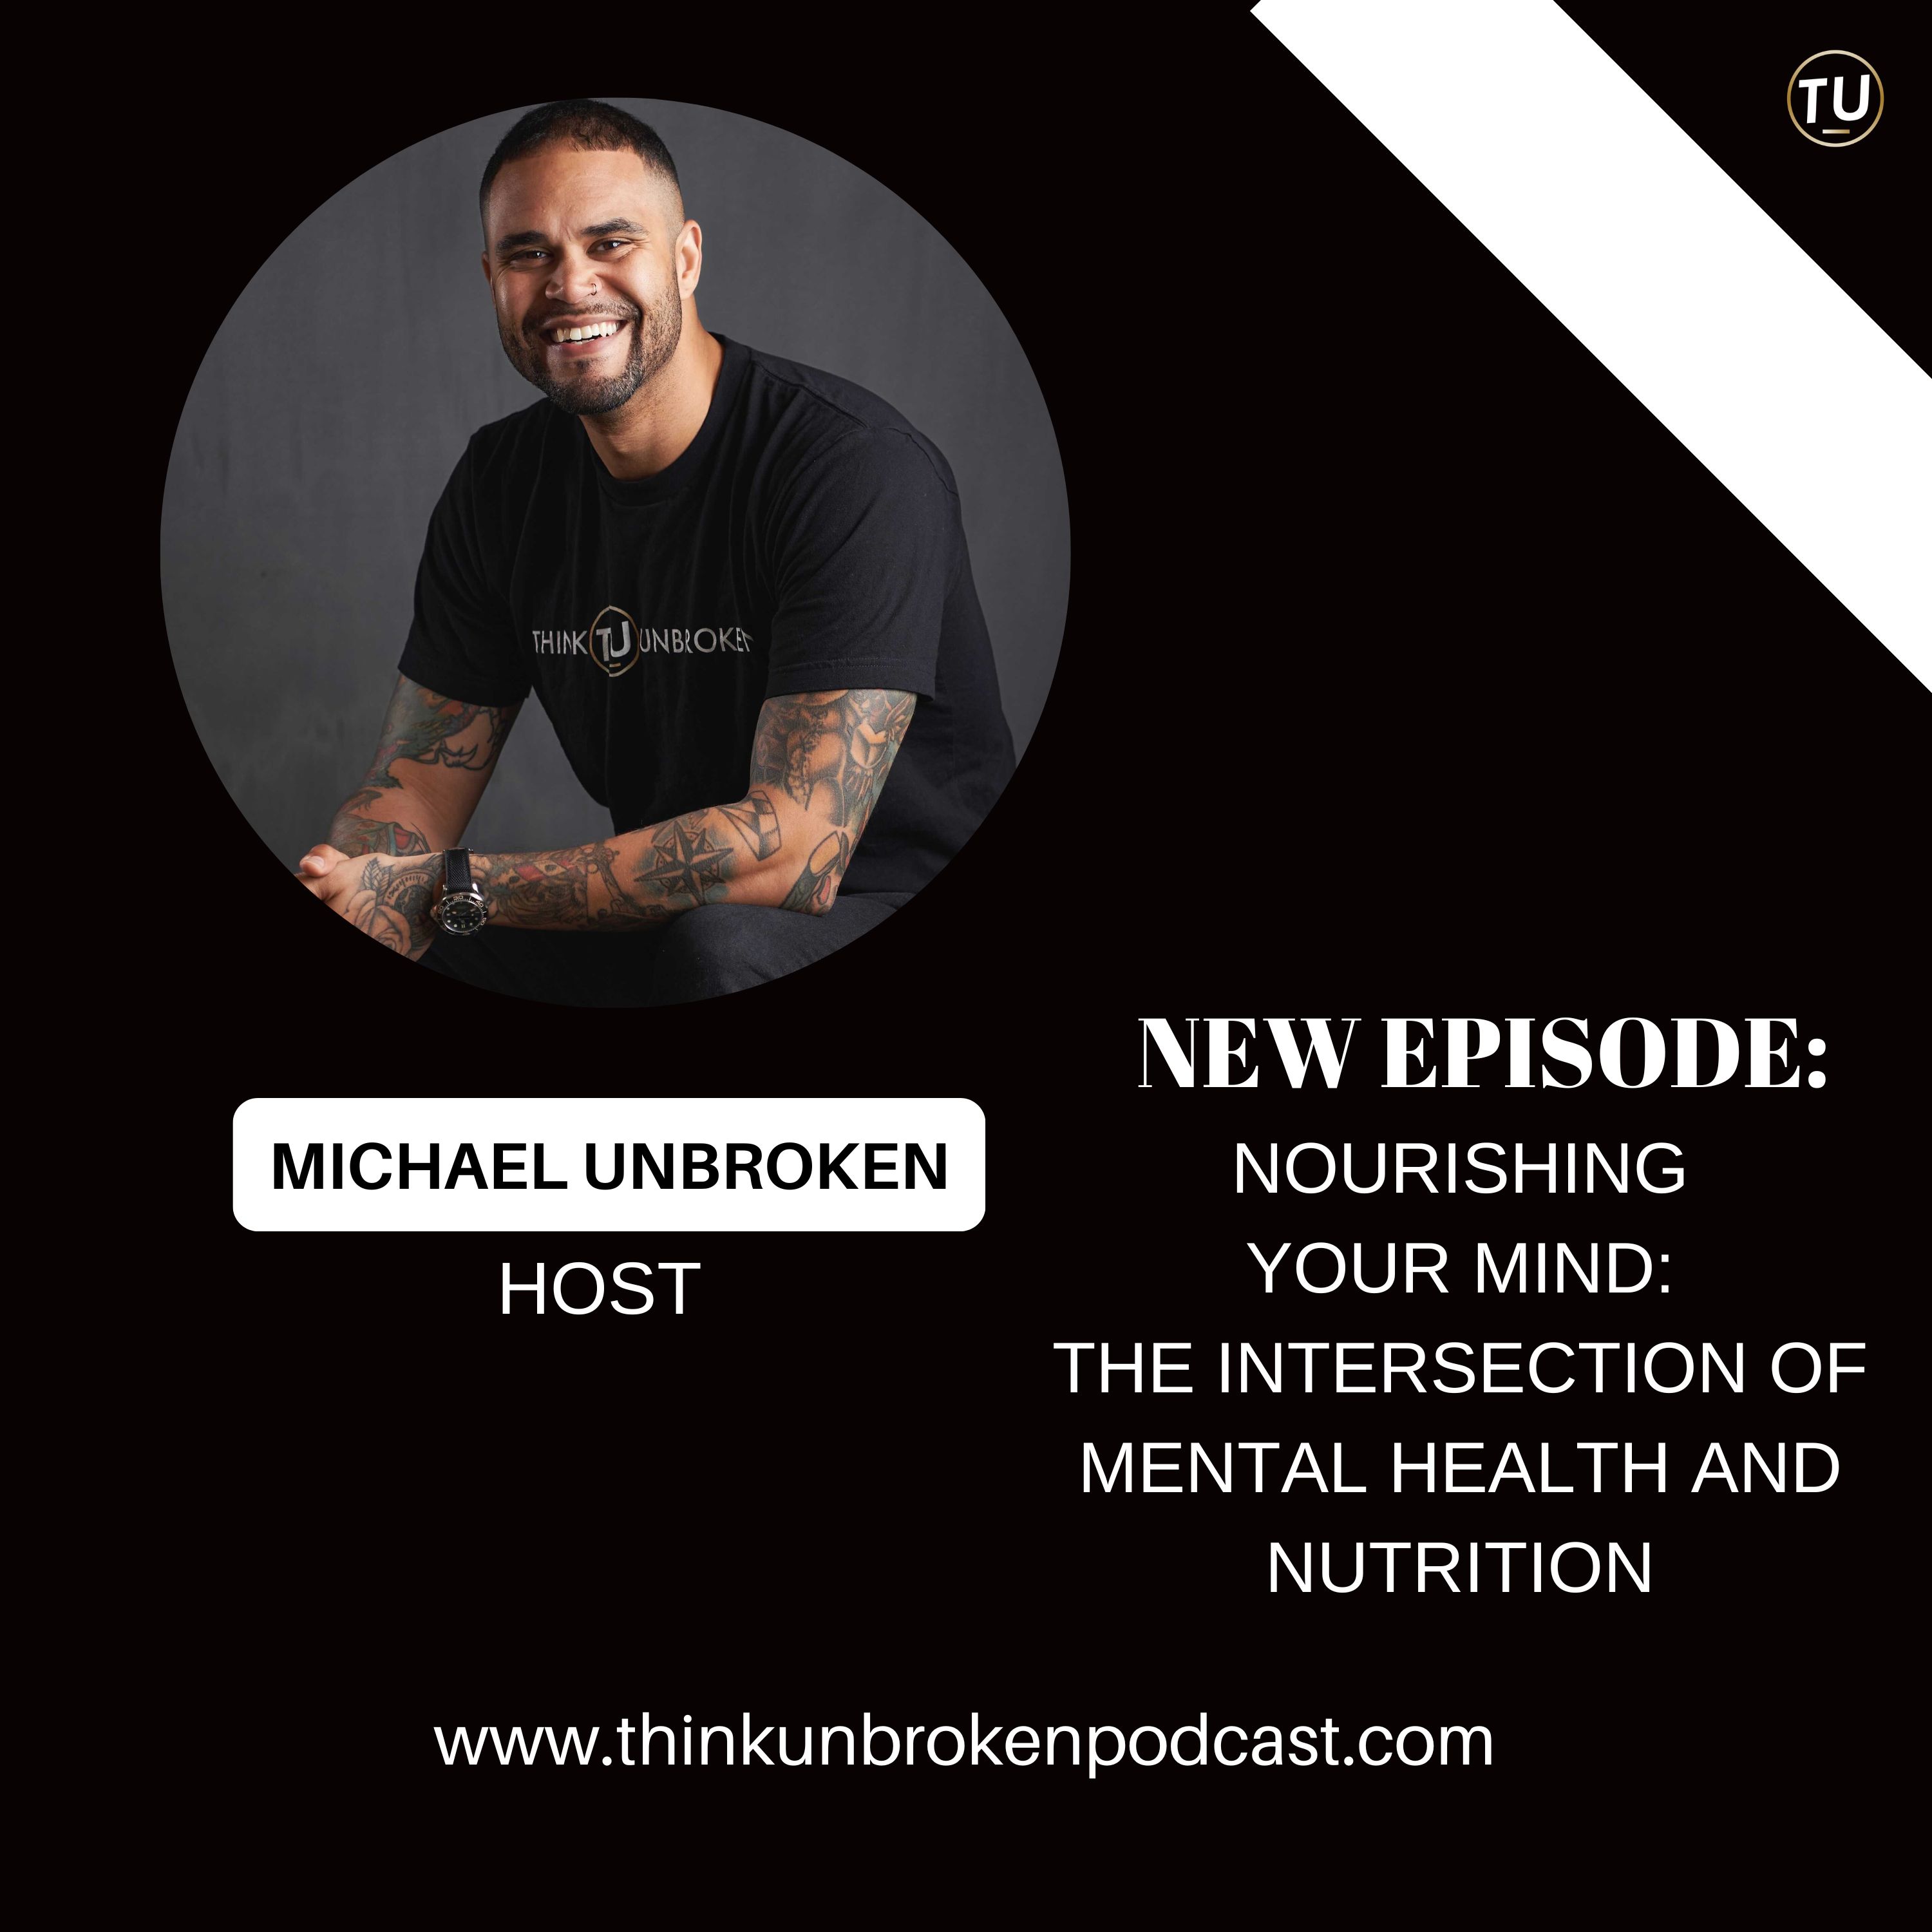 Nourishing Your Mind: The Intersection of Mental Health and Nutrition